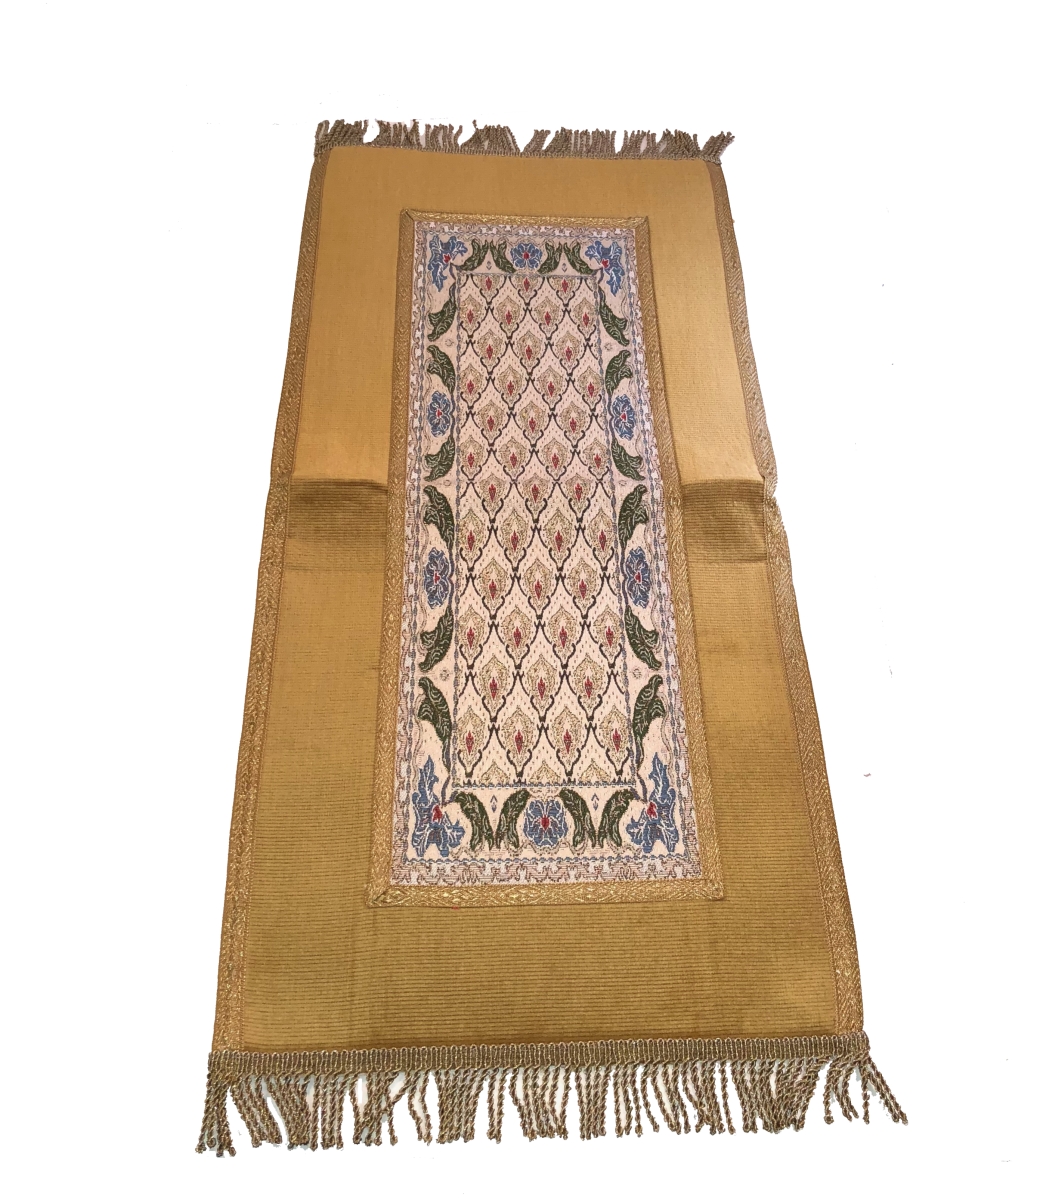 Fou1246gld 12 X 46 Belgium Fouquete Table Runner, Gold